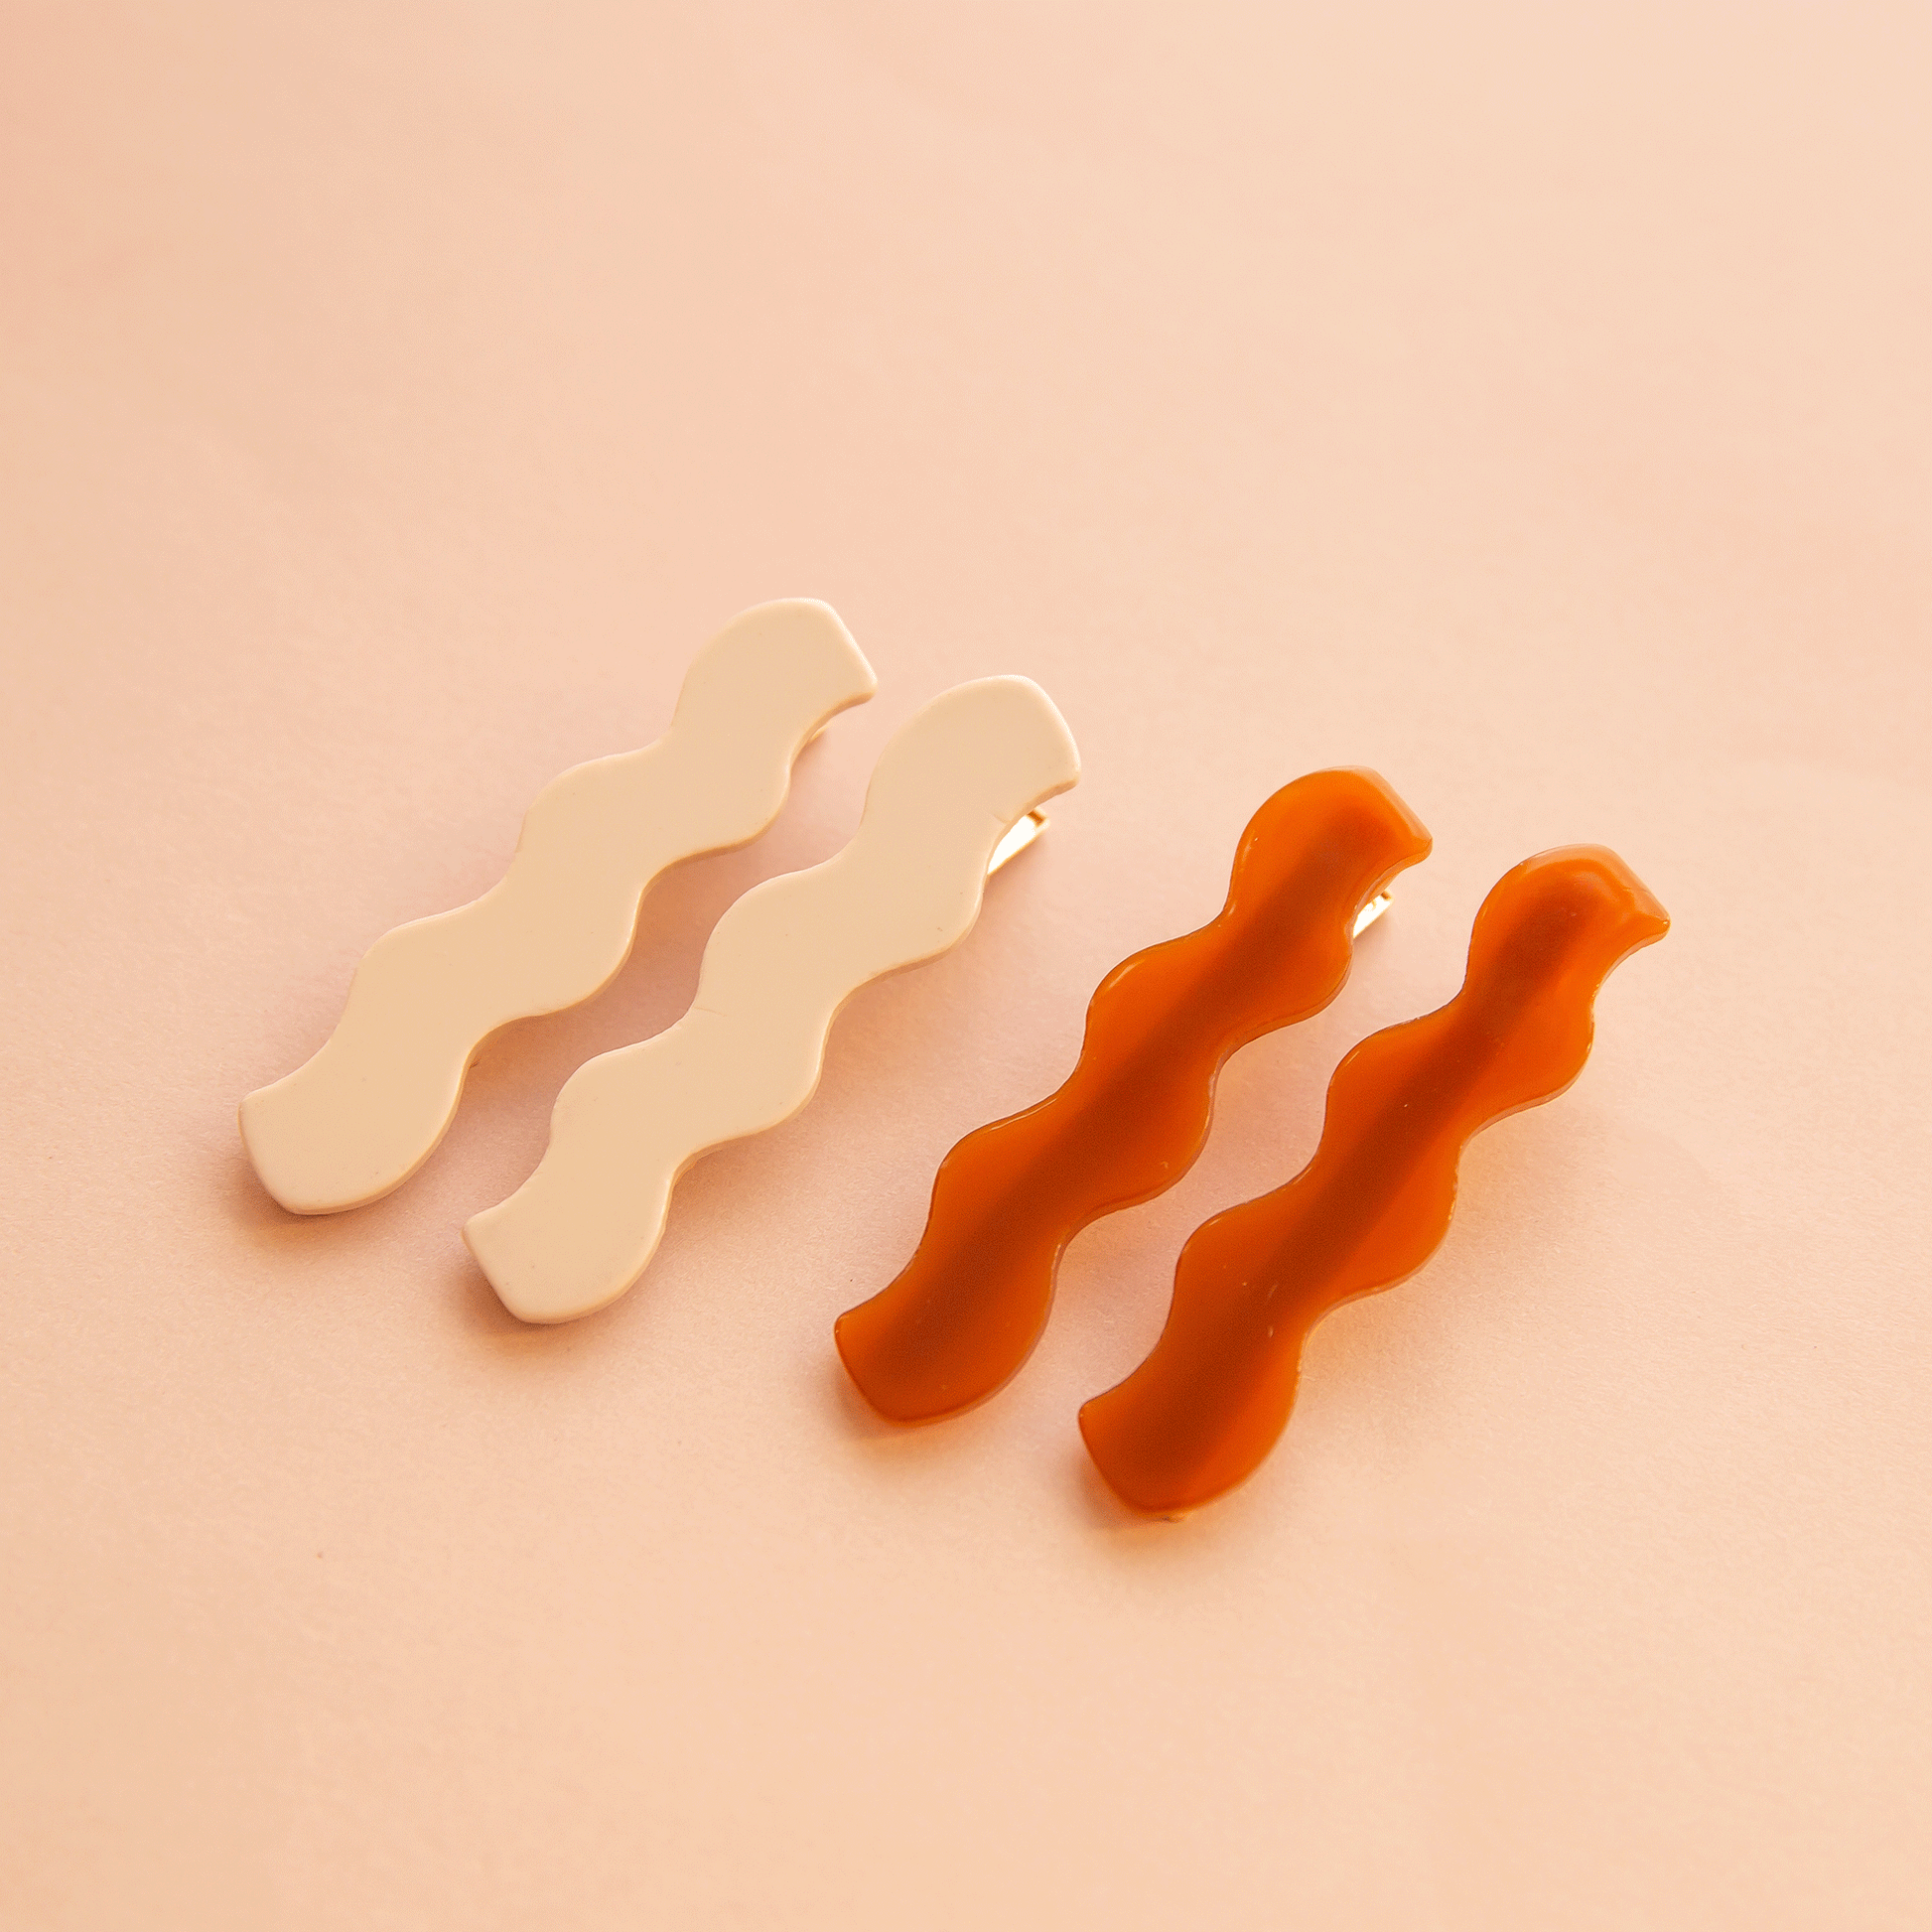 On a peach background is two pairs of wavy hair clips.